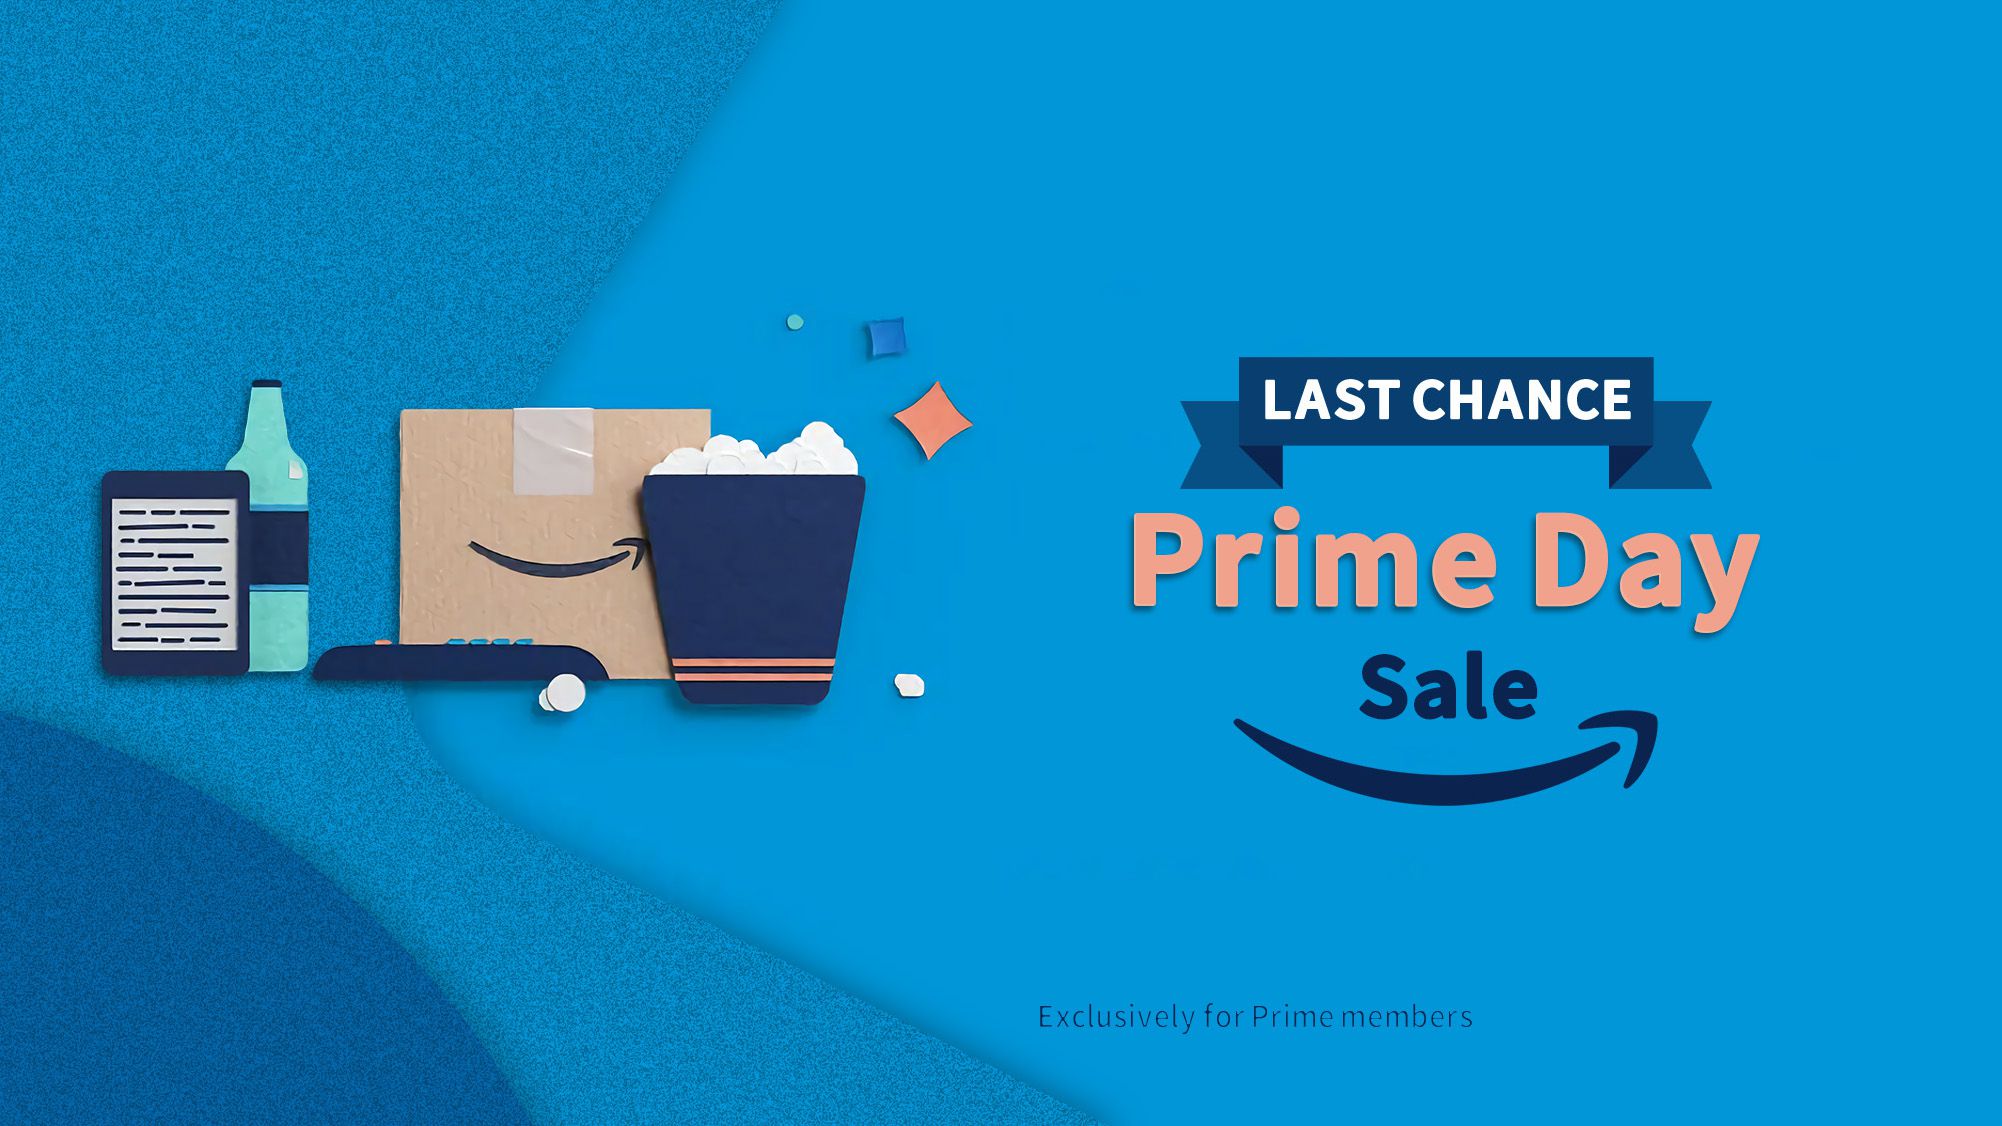 https://images.macrumors.com/t/4ZYSpVc-aSy7Tg7wUrlYwZ7AJX4=/2002x/article-new/2023/07/Last-Chance-Prime-Day-Sales-Feature.jpg